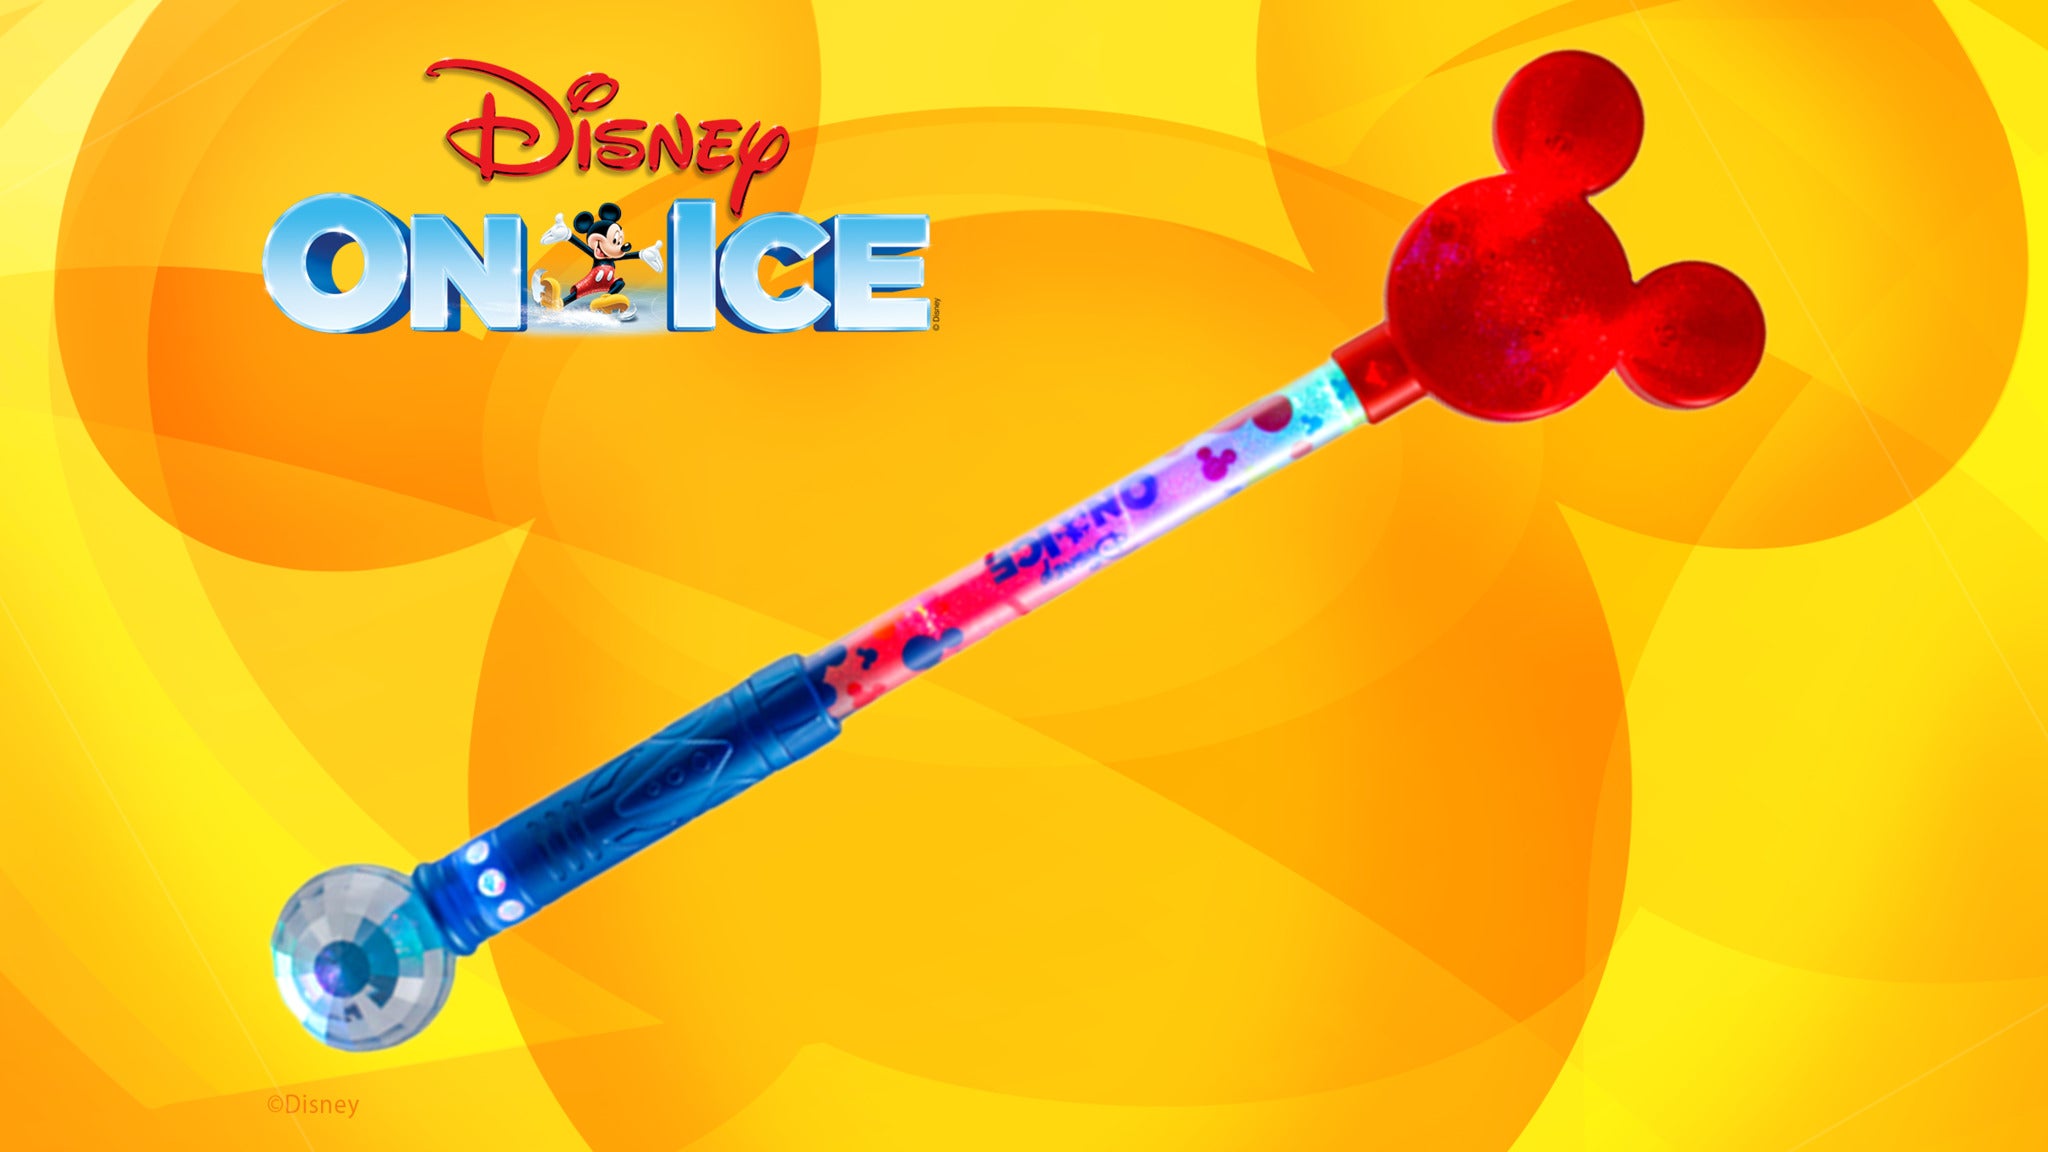 Disney On Ice: Mickey Light-Up Wand in Laredo promo photo for Priority Customer presale offer code